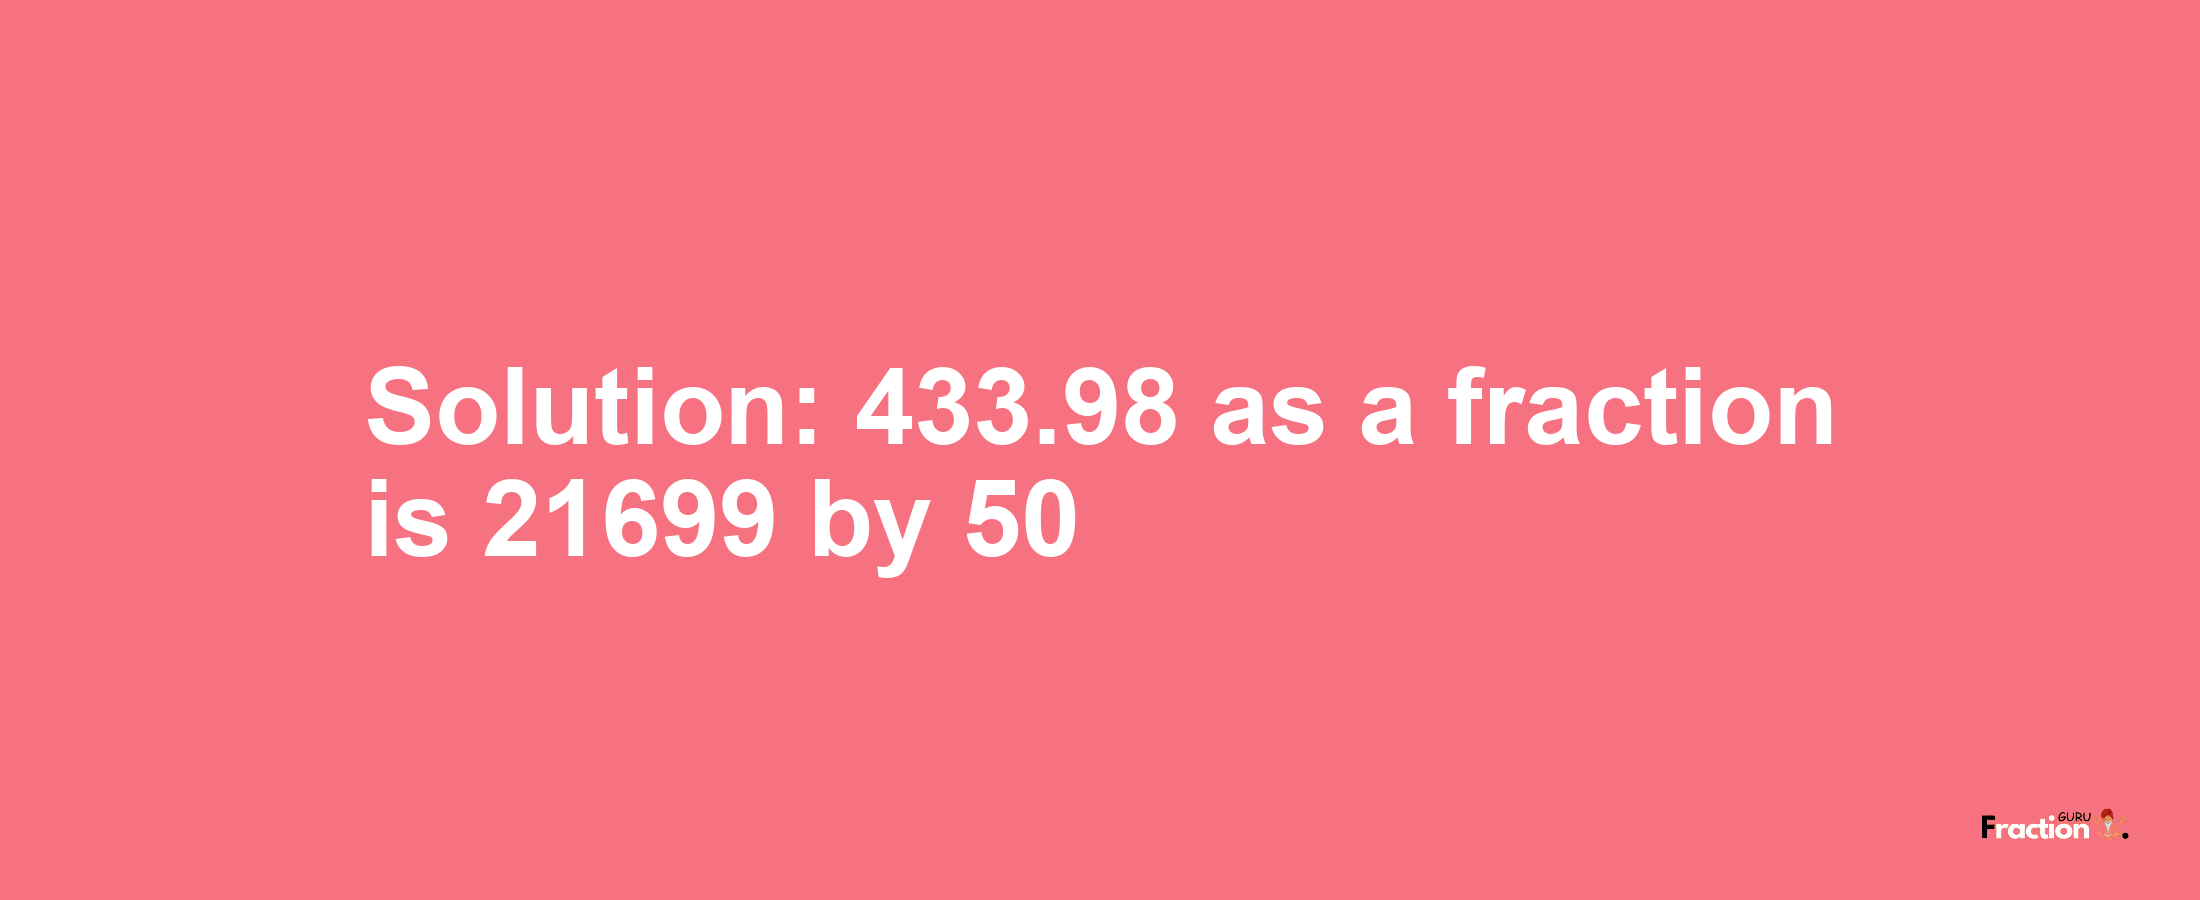 Solution:433.98 as a fraction is 21699/50